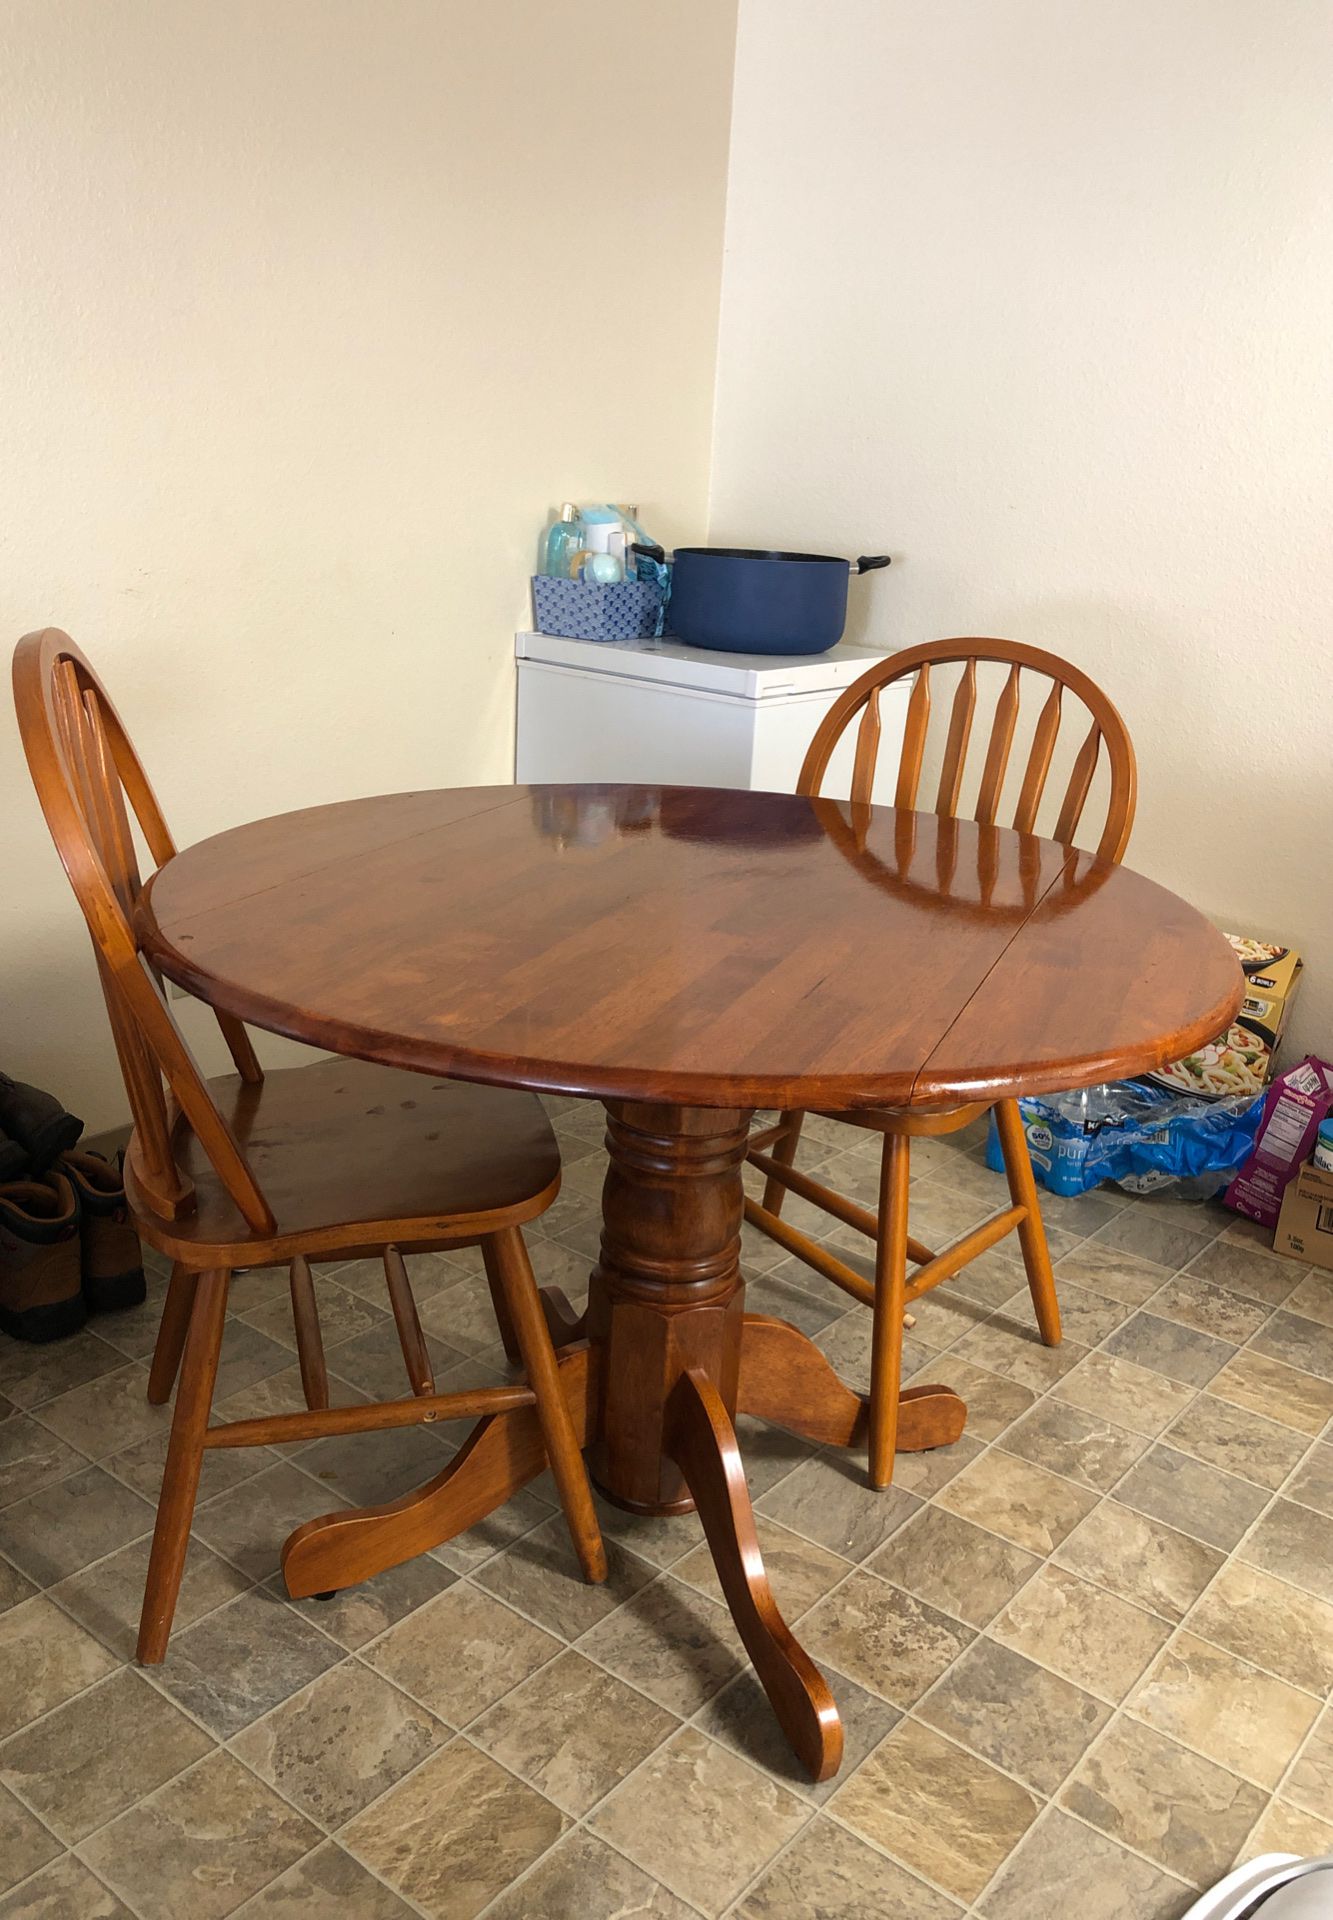 Small dinning table and 2 chairs